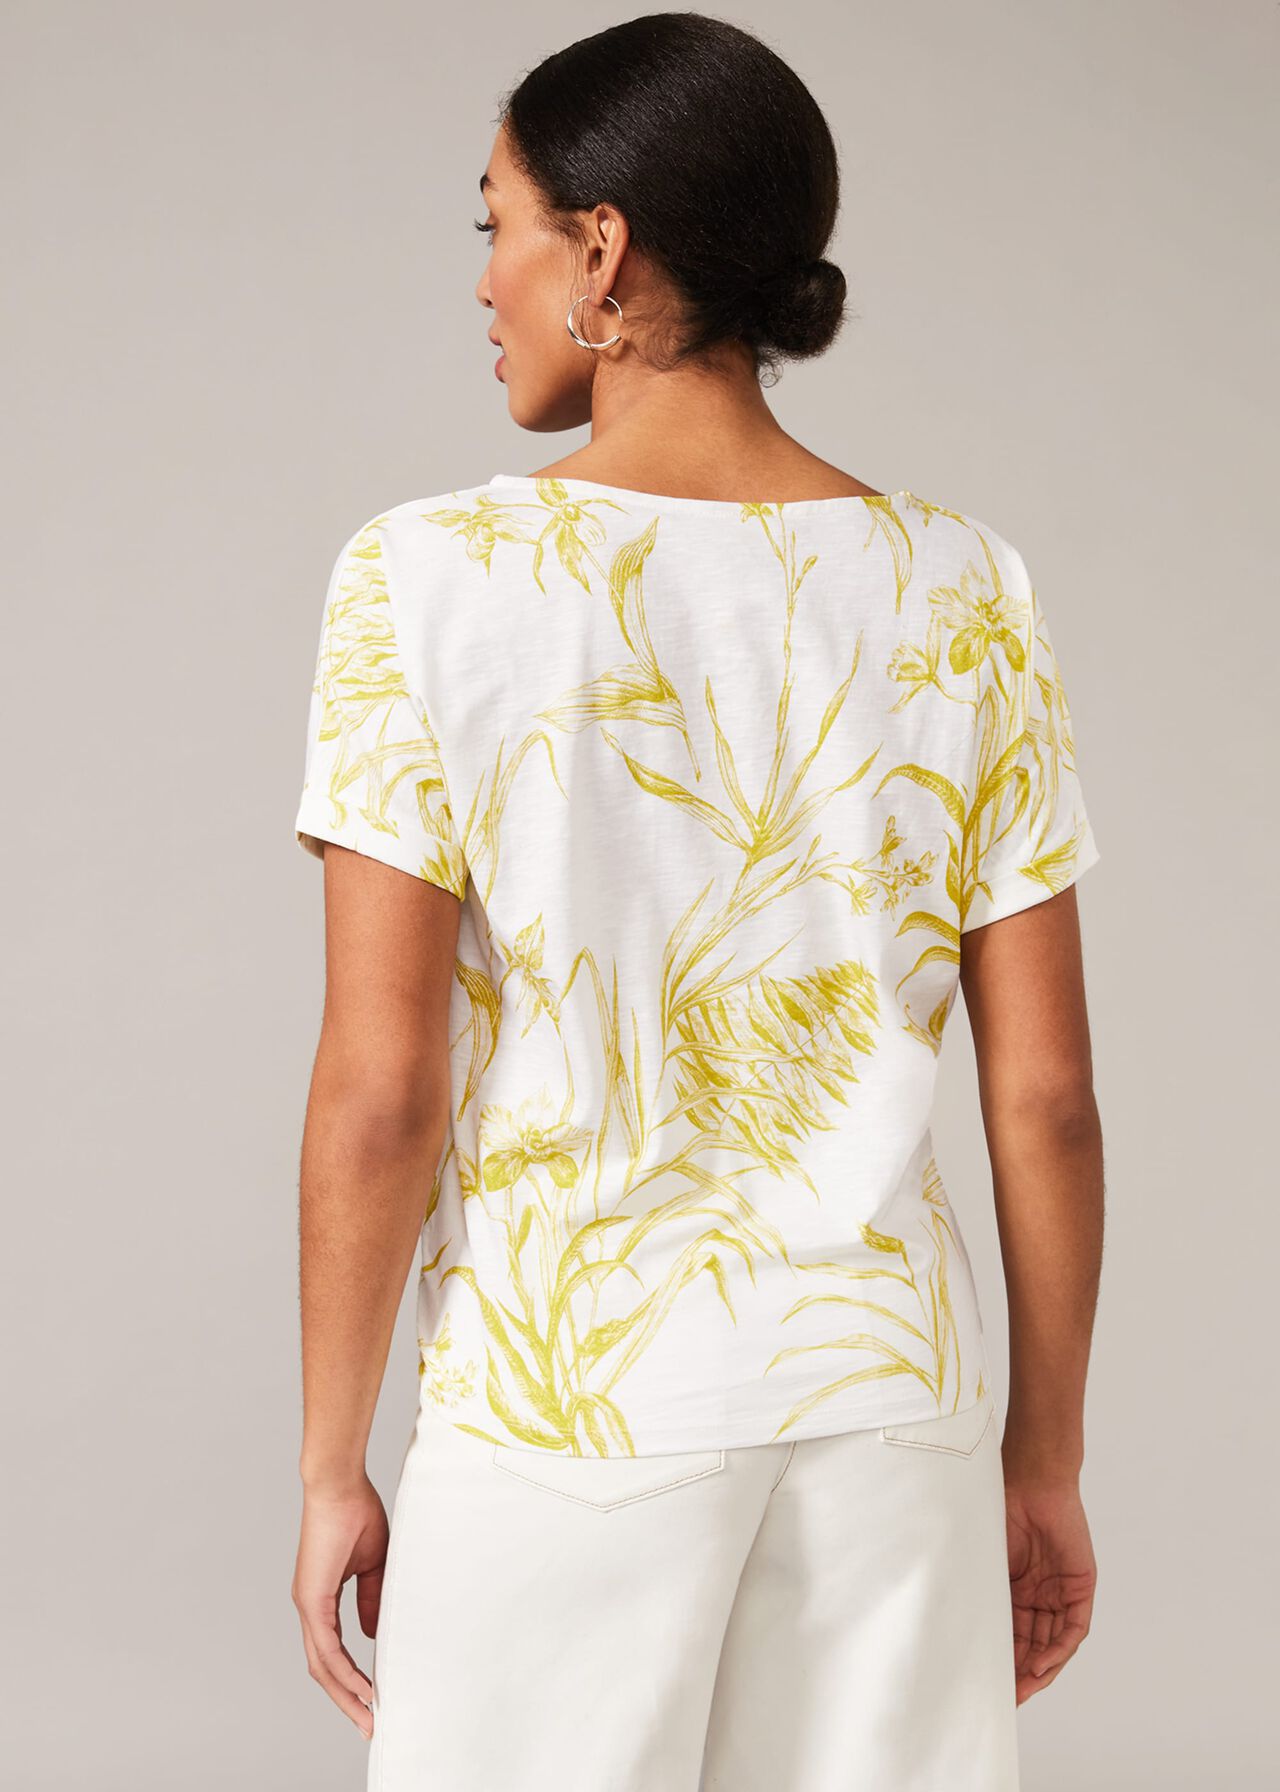 Anwen Orchid Stencil Floral Top